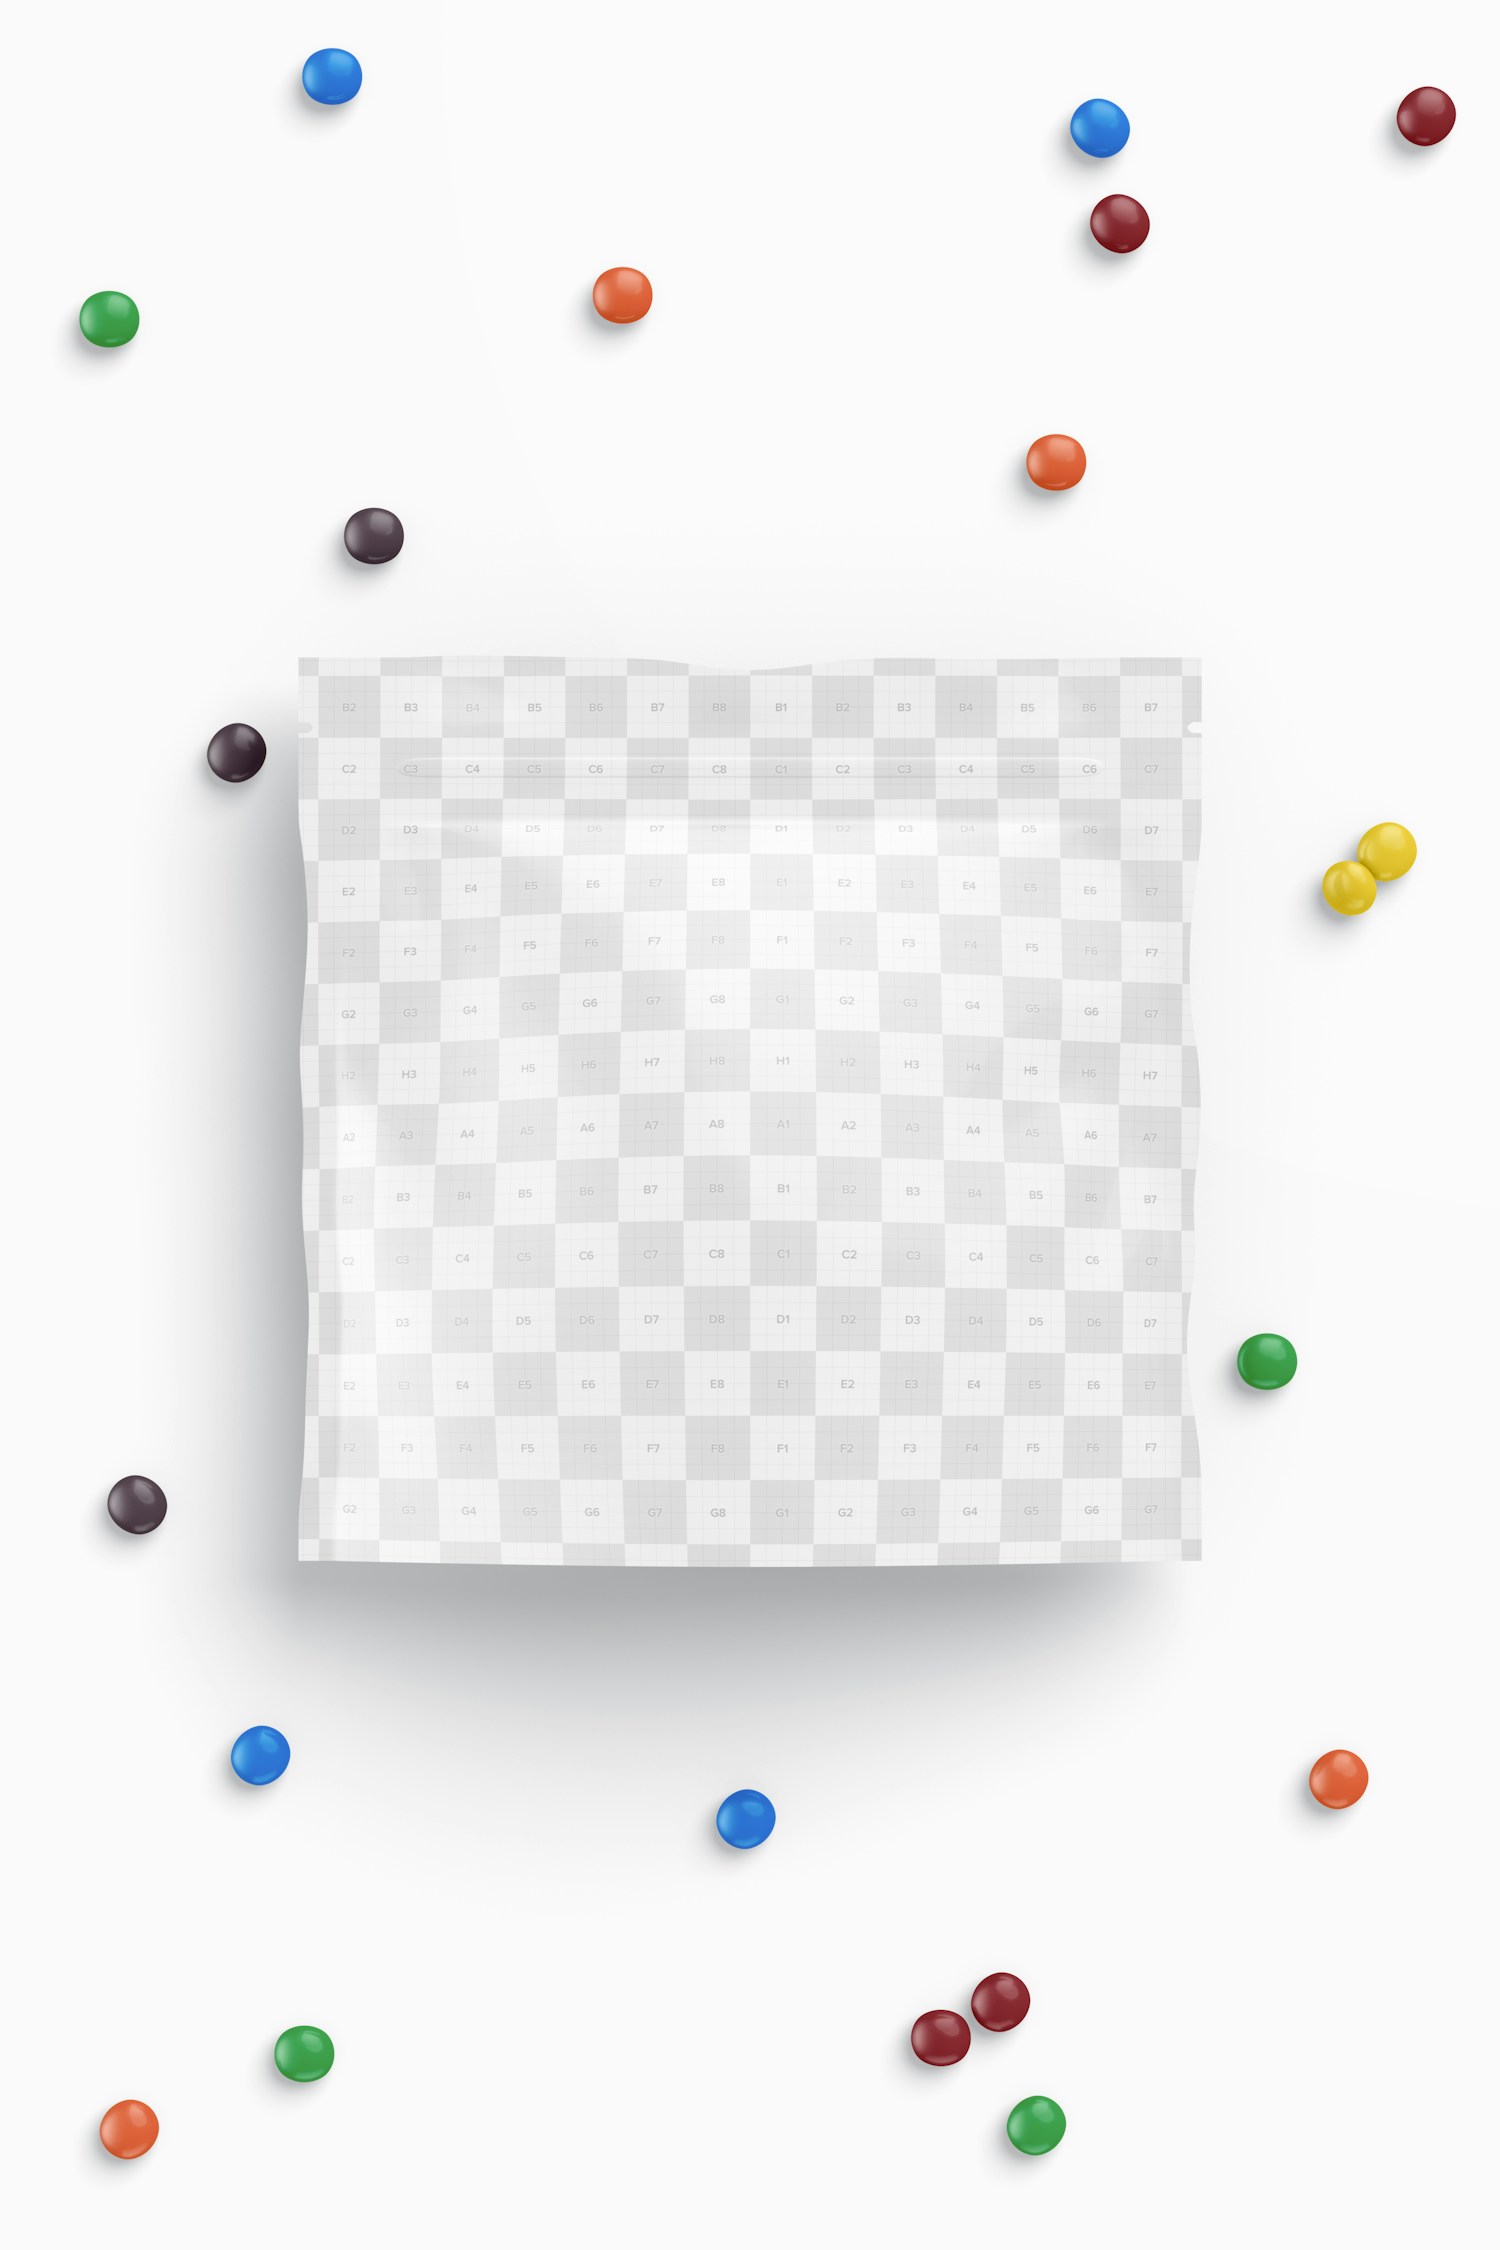 Candy Bag Mockup, Top View